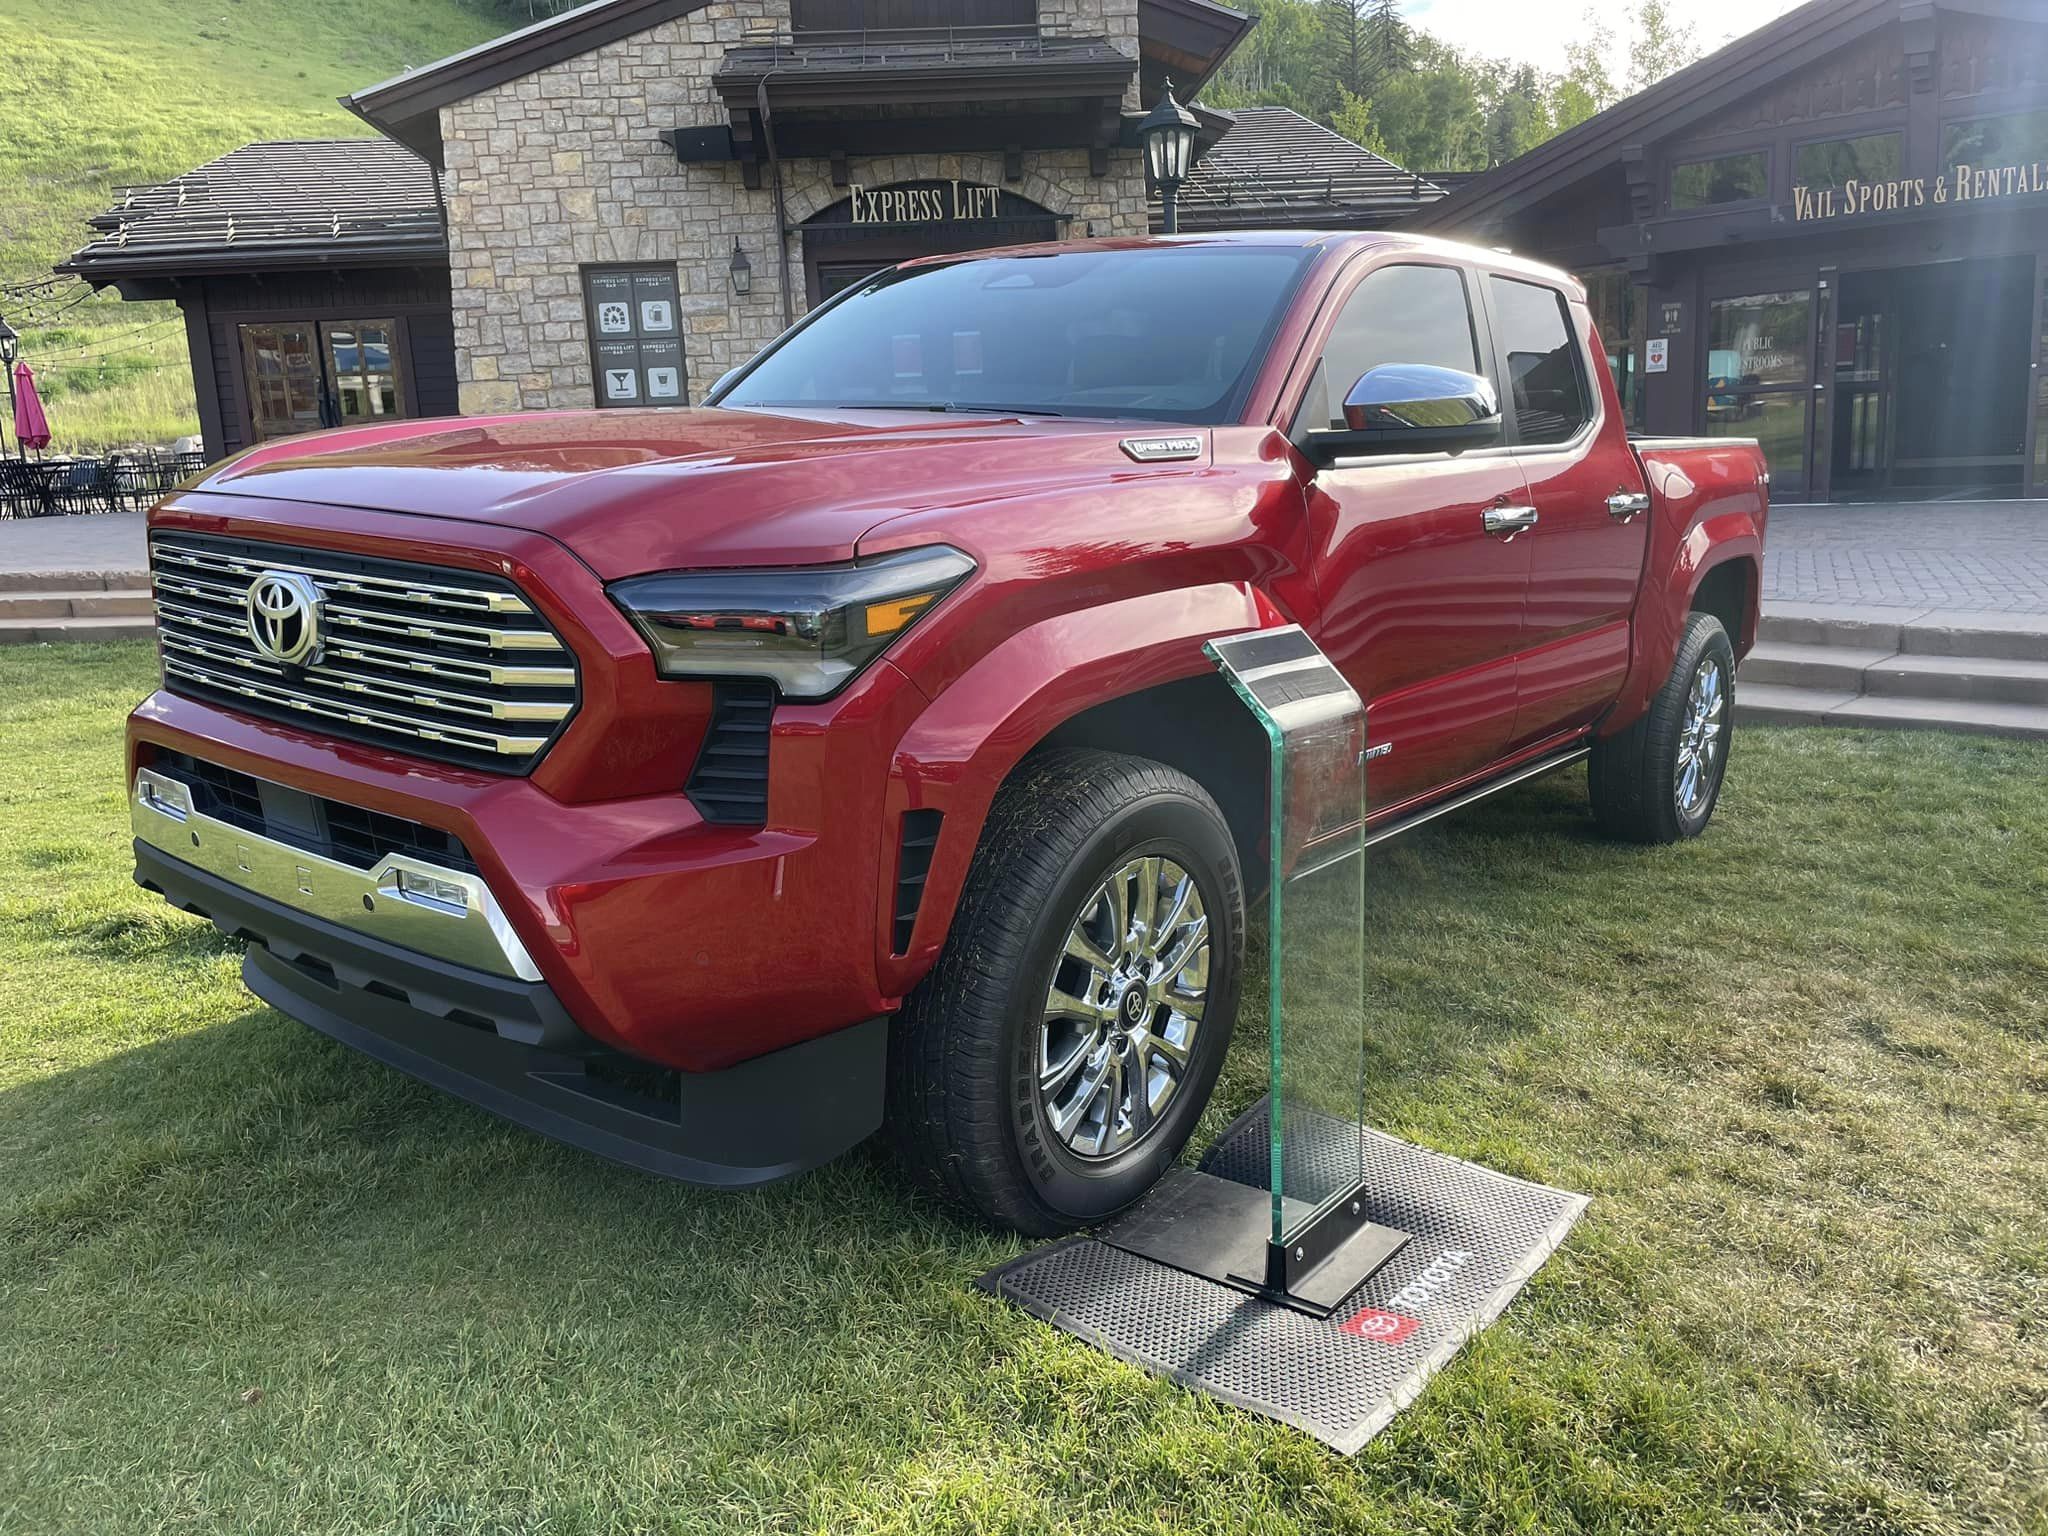 2024 Tacoma Official SUPERSONIC RED 2024 Tacoma Thread (4th Gen) 2024 Tacoma Limited in Supersonic Red 4